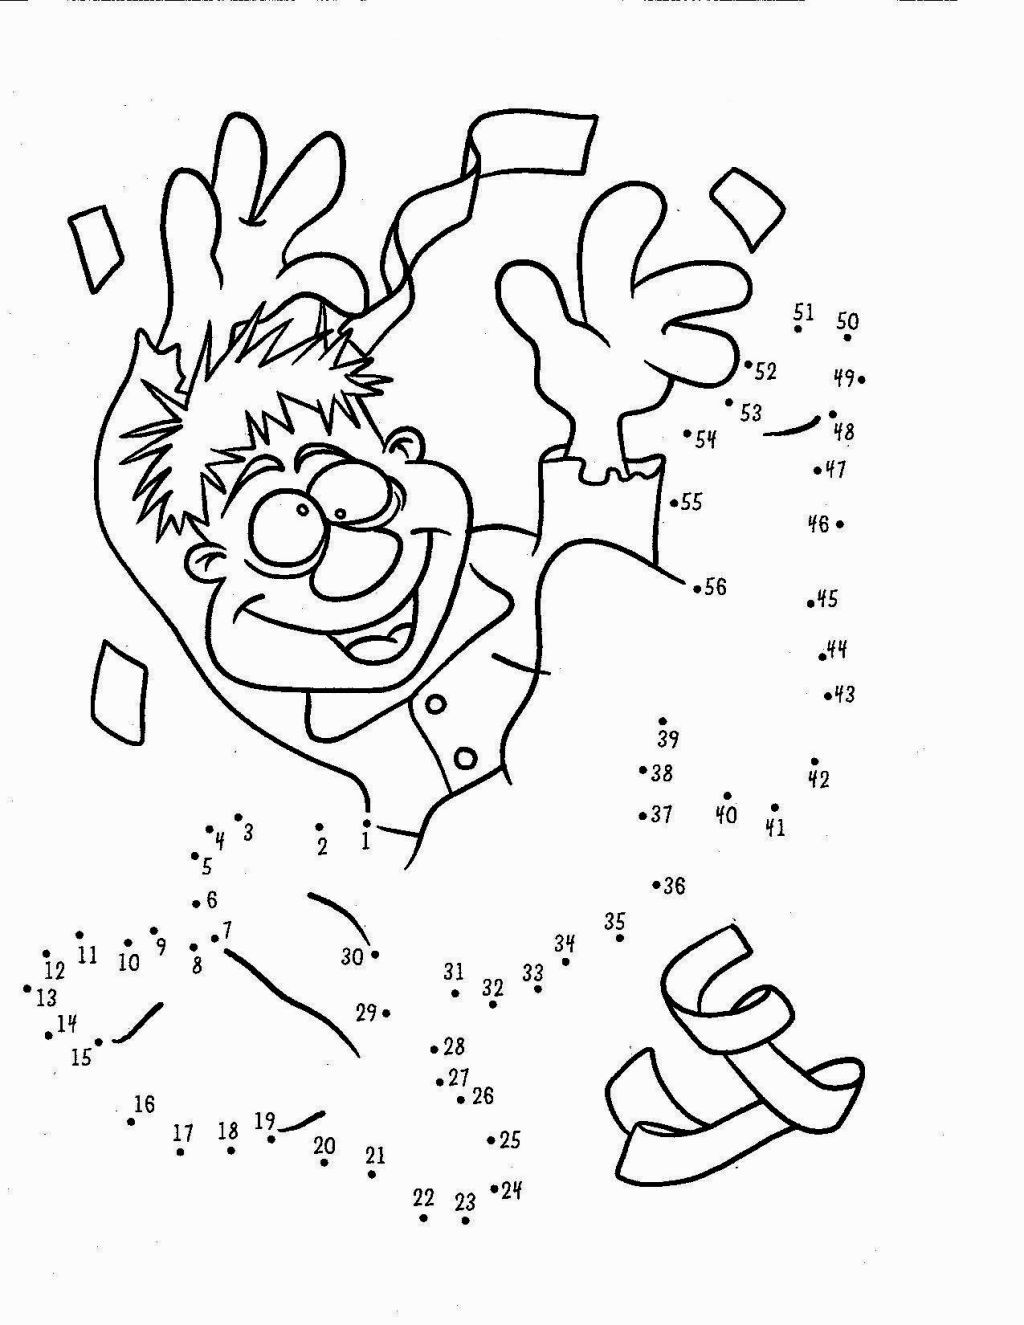 Washington State Coloring Pages | Coloring Pages